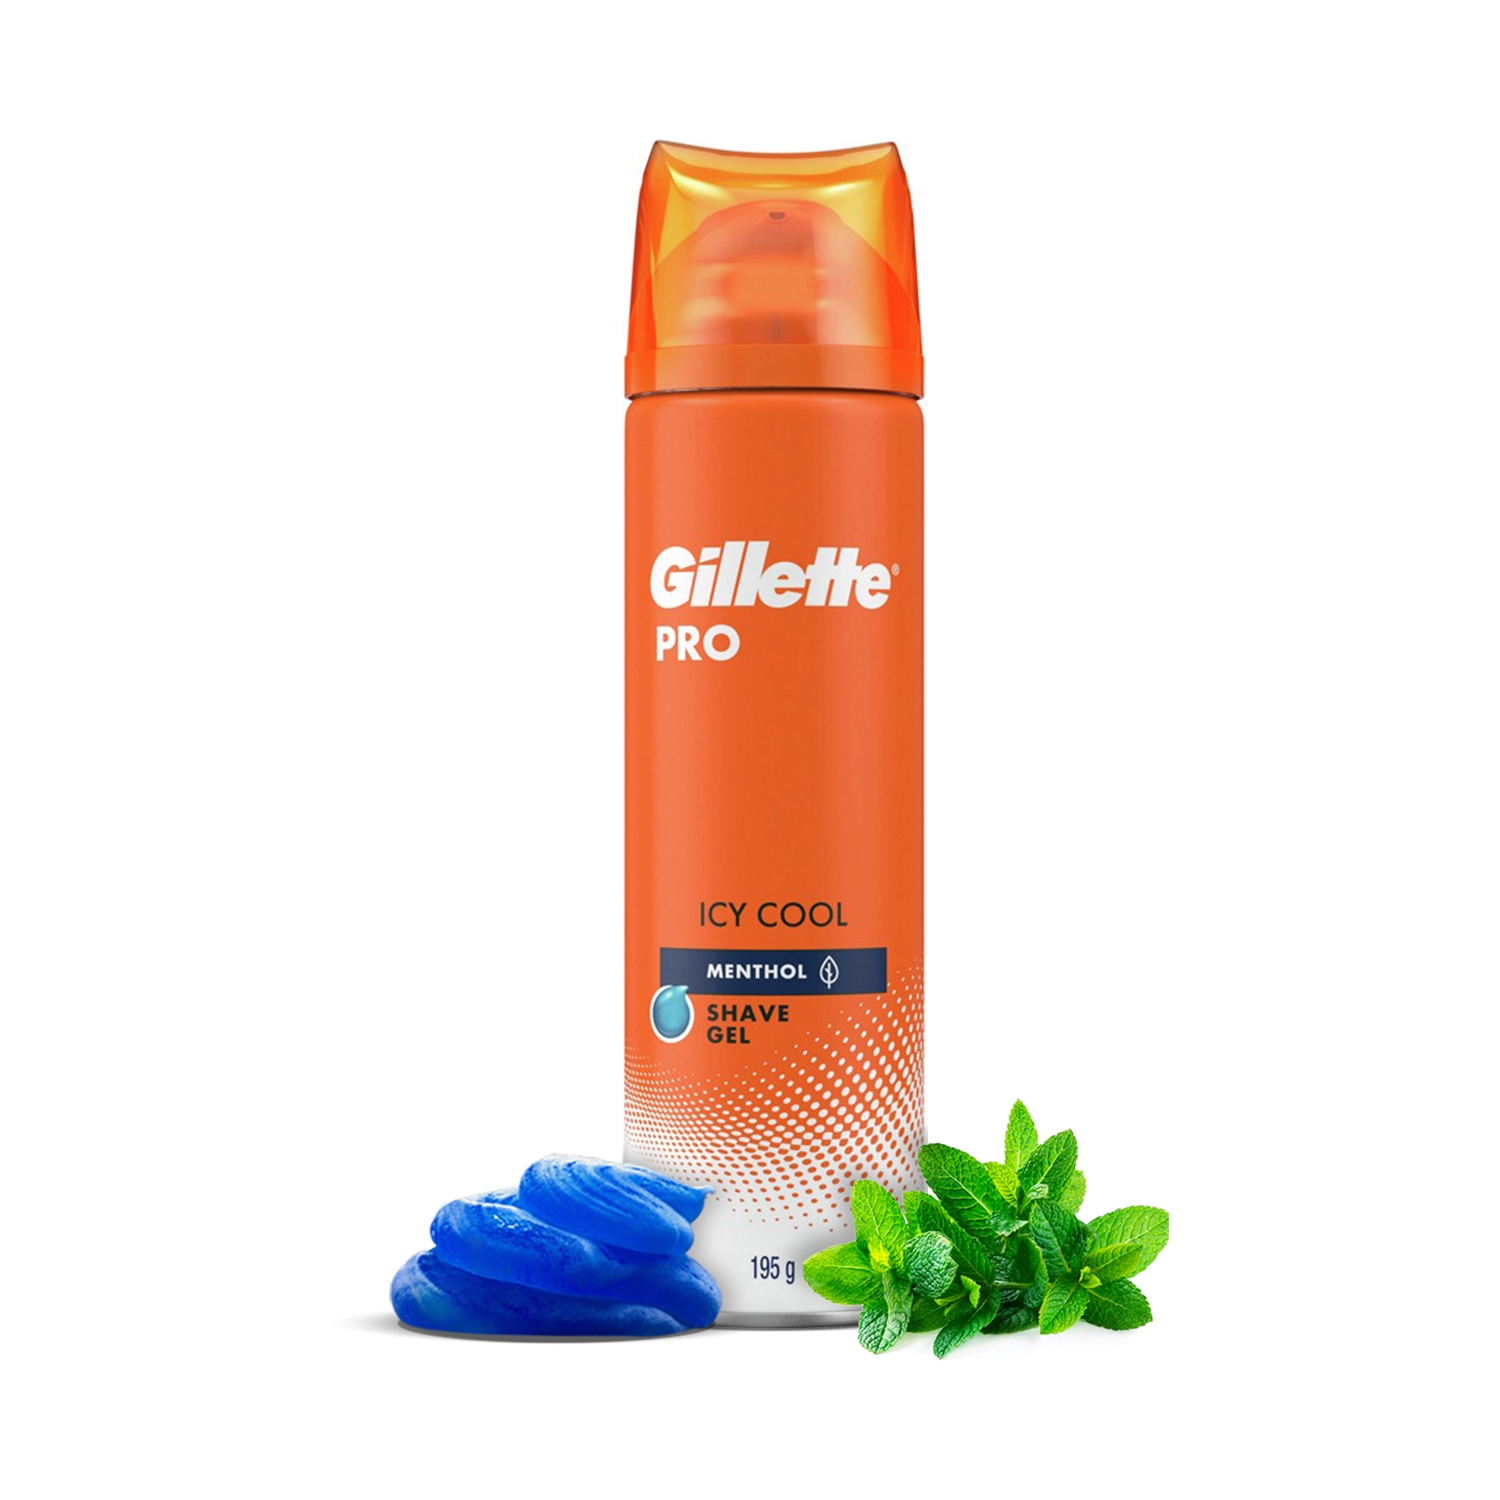 Gillette | Gillette Pro Shaving Gel Icy Cool with Menthol (200ml)